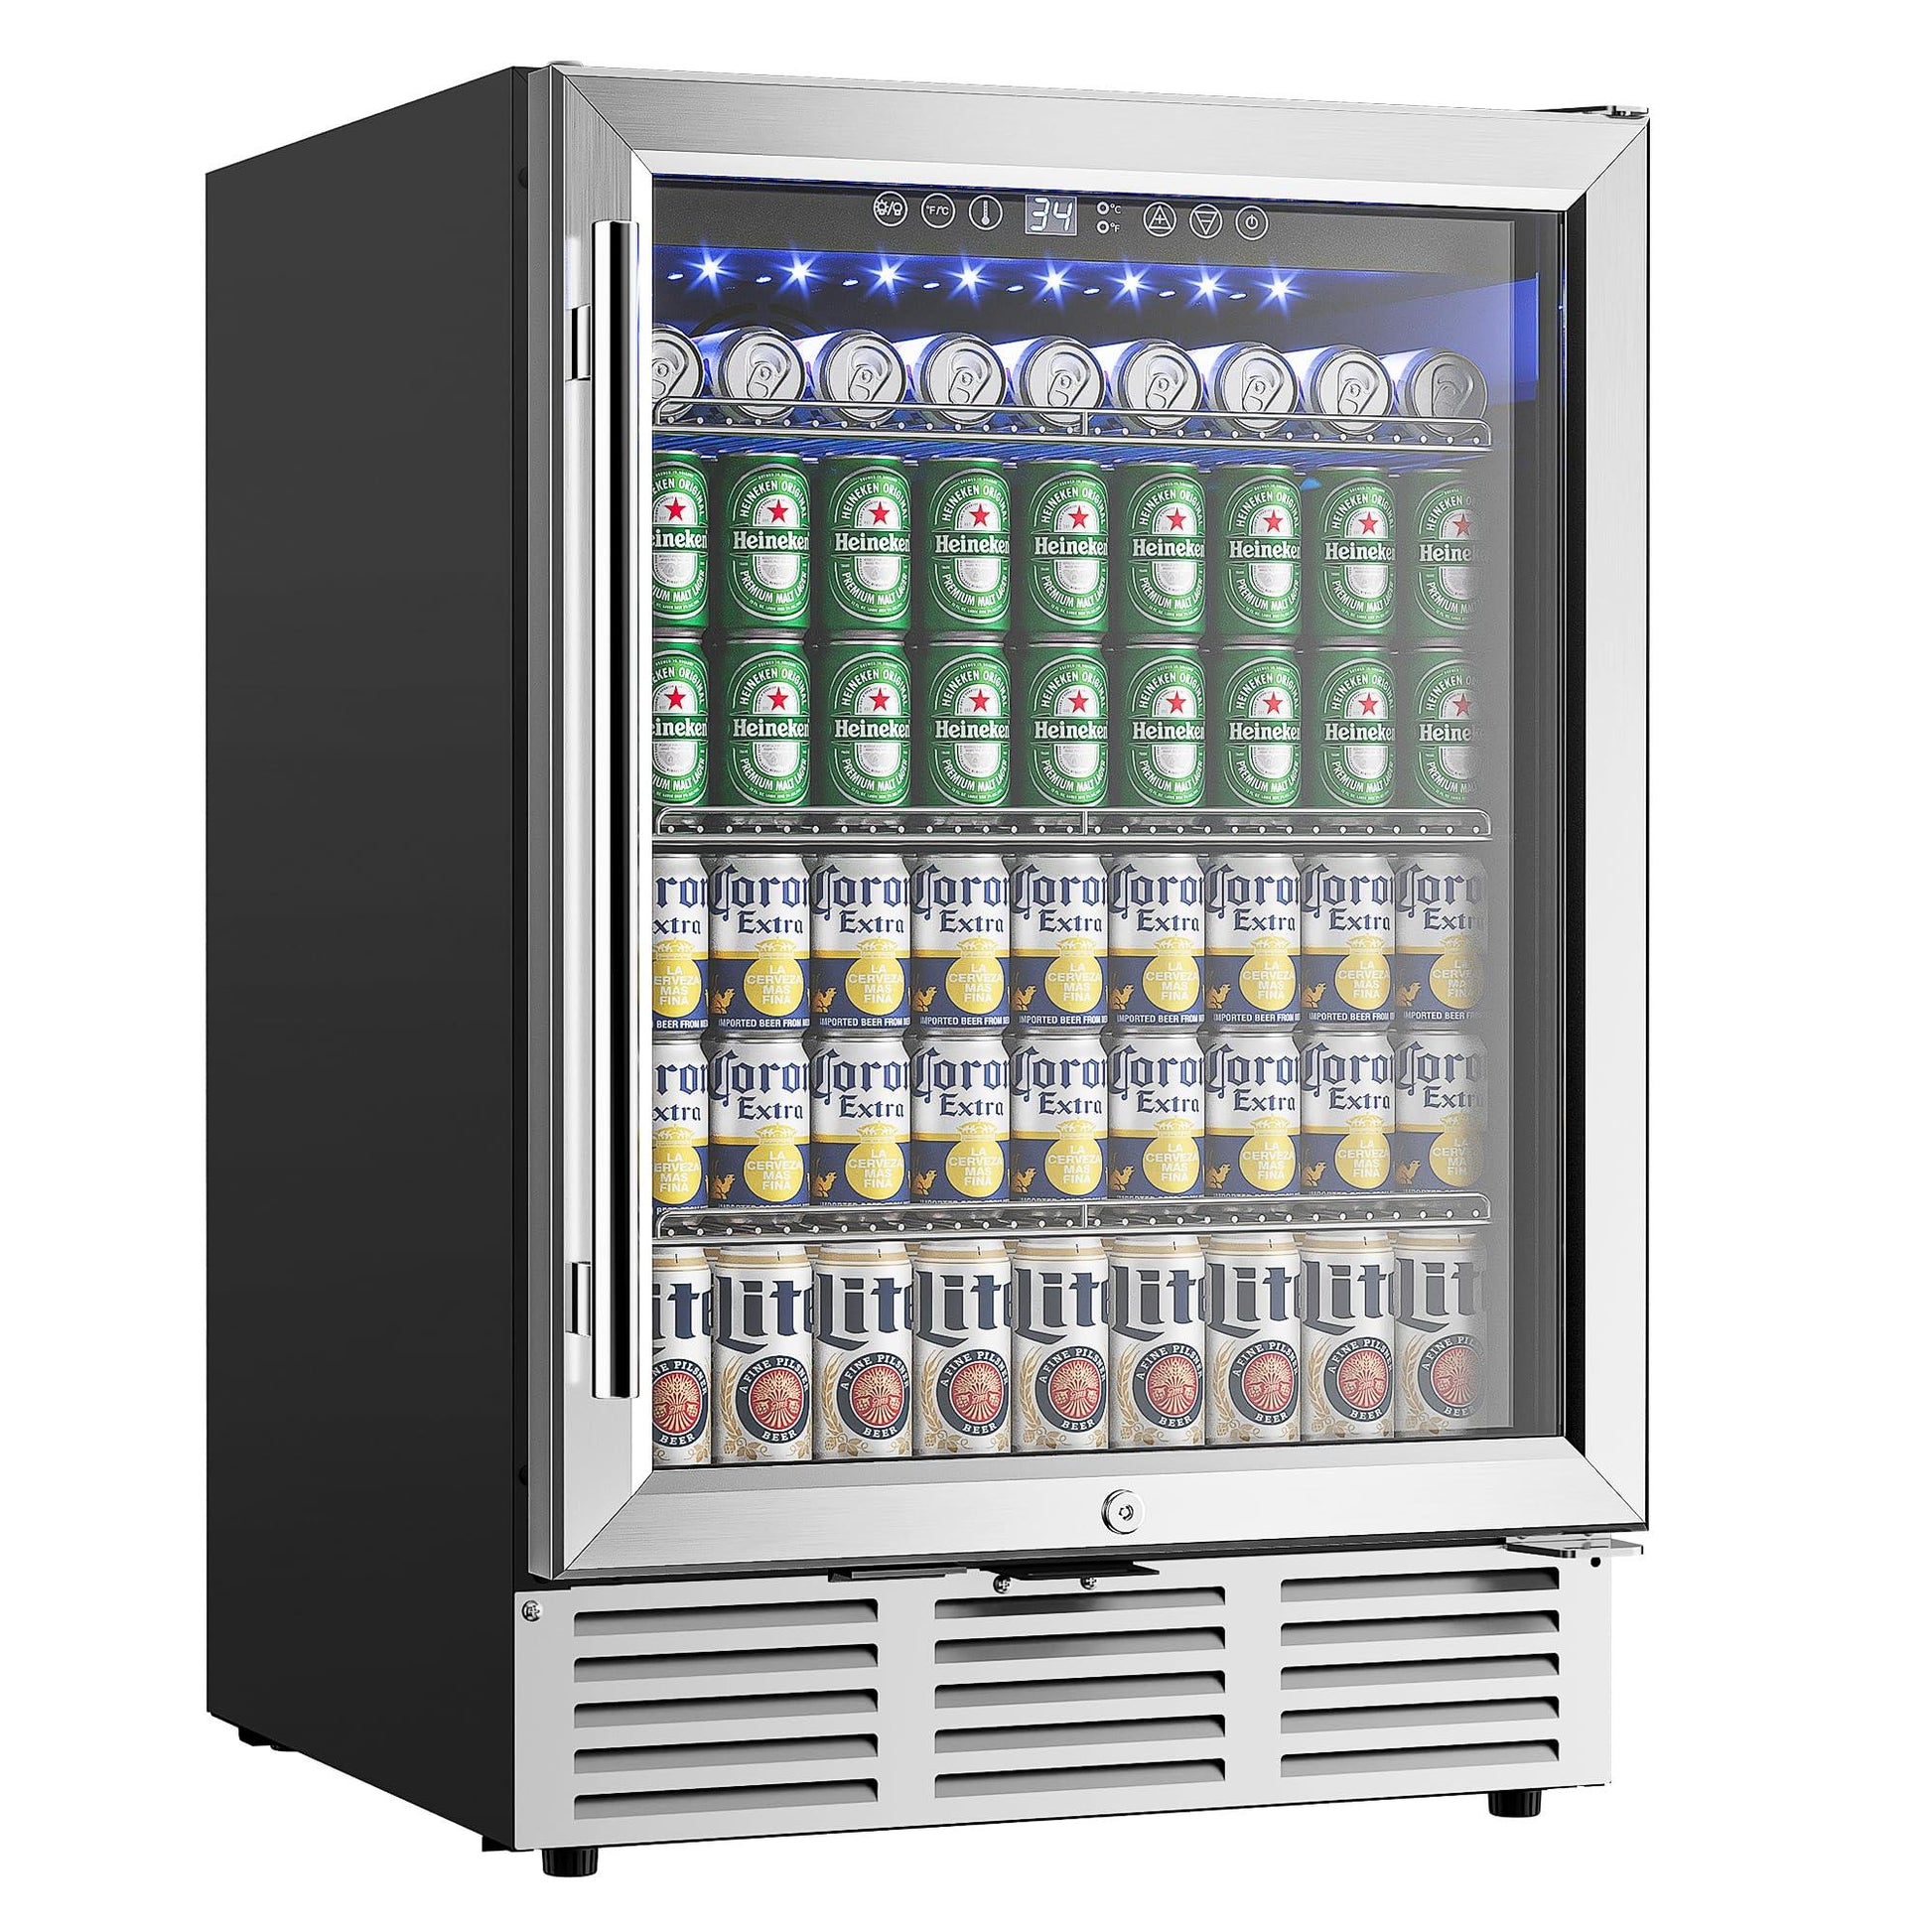 EUHOMY 24 Inch Beverage Refrigerator, 180 Can Built-in or Freestanding Beverage Cooler, Under Counter Beer Fridge with Glass Door for Soda, Water, Wine - For Kitchen, Bar or Office. - CookCave